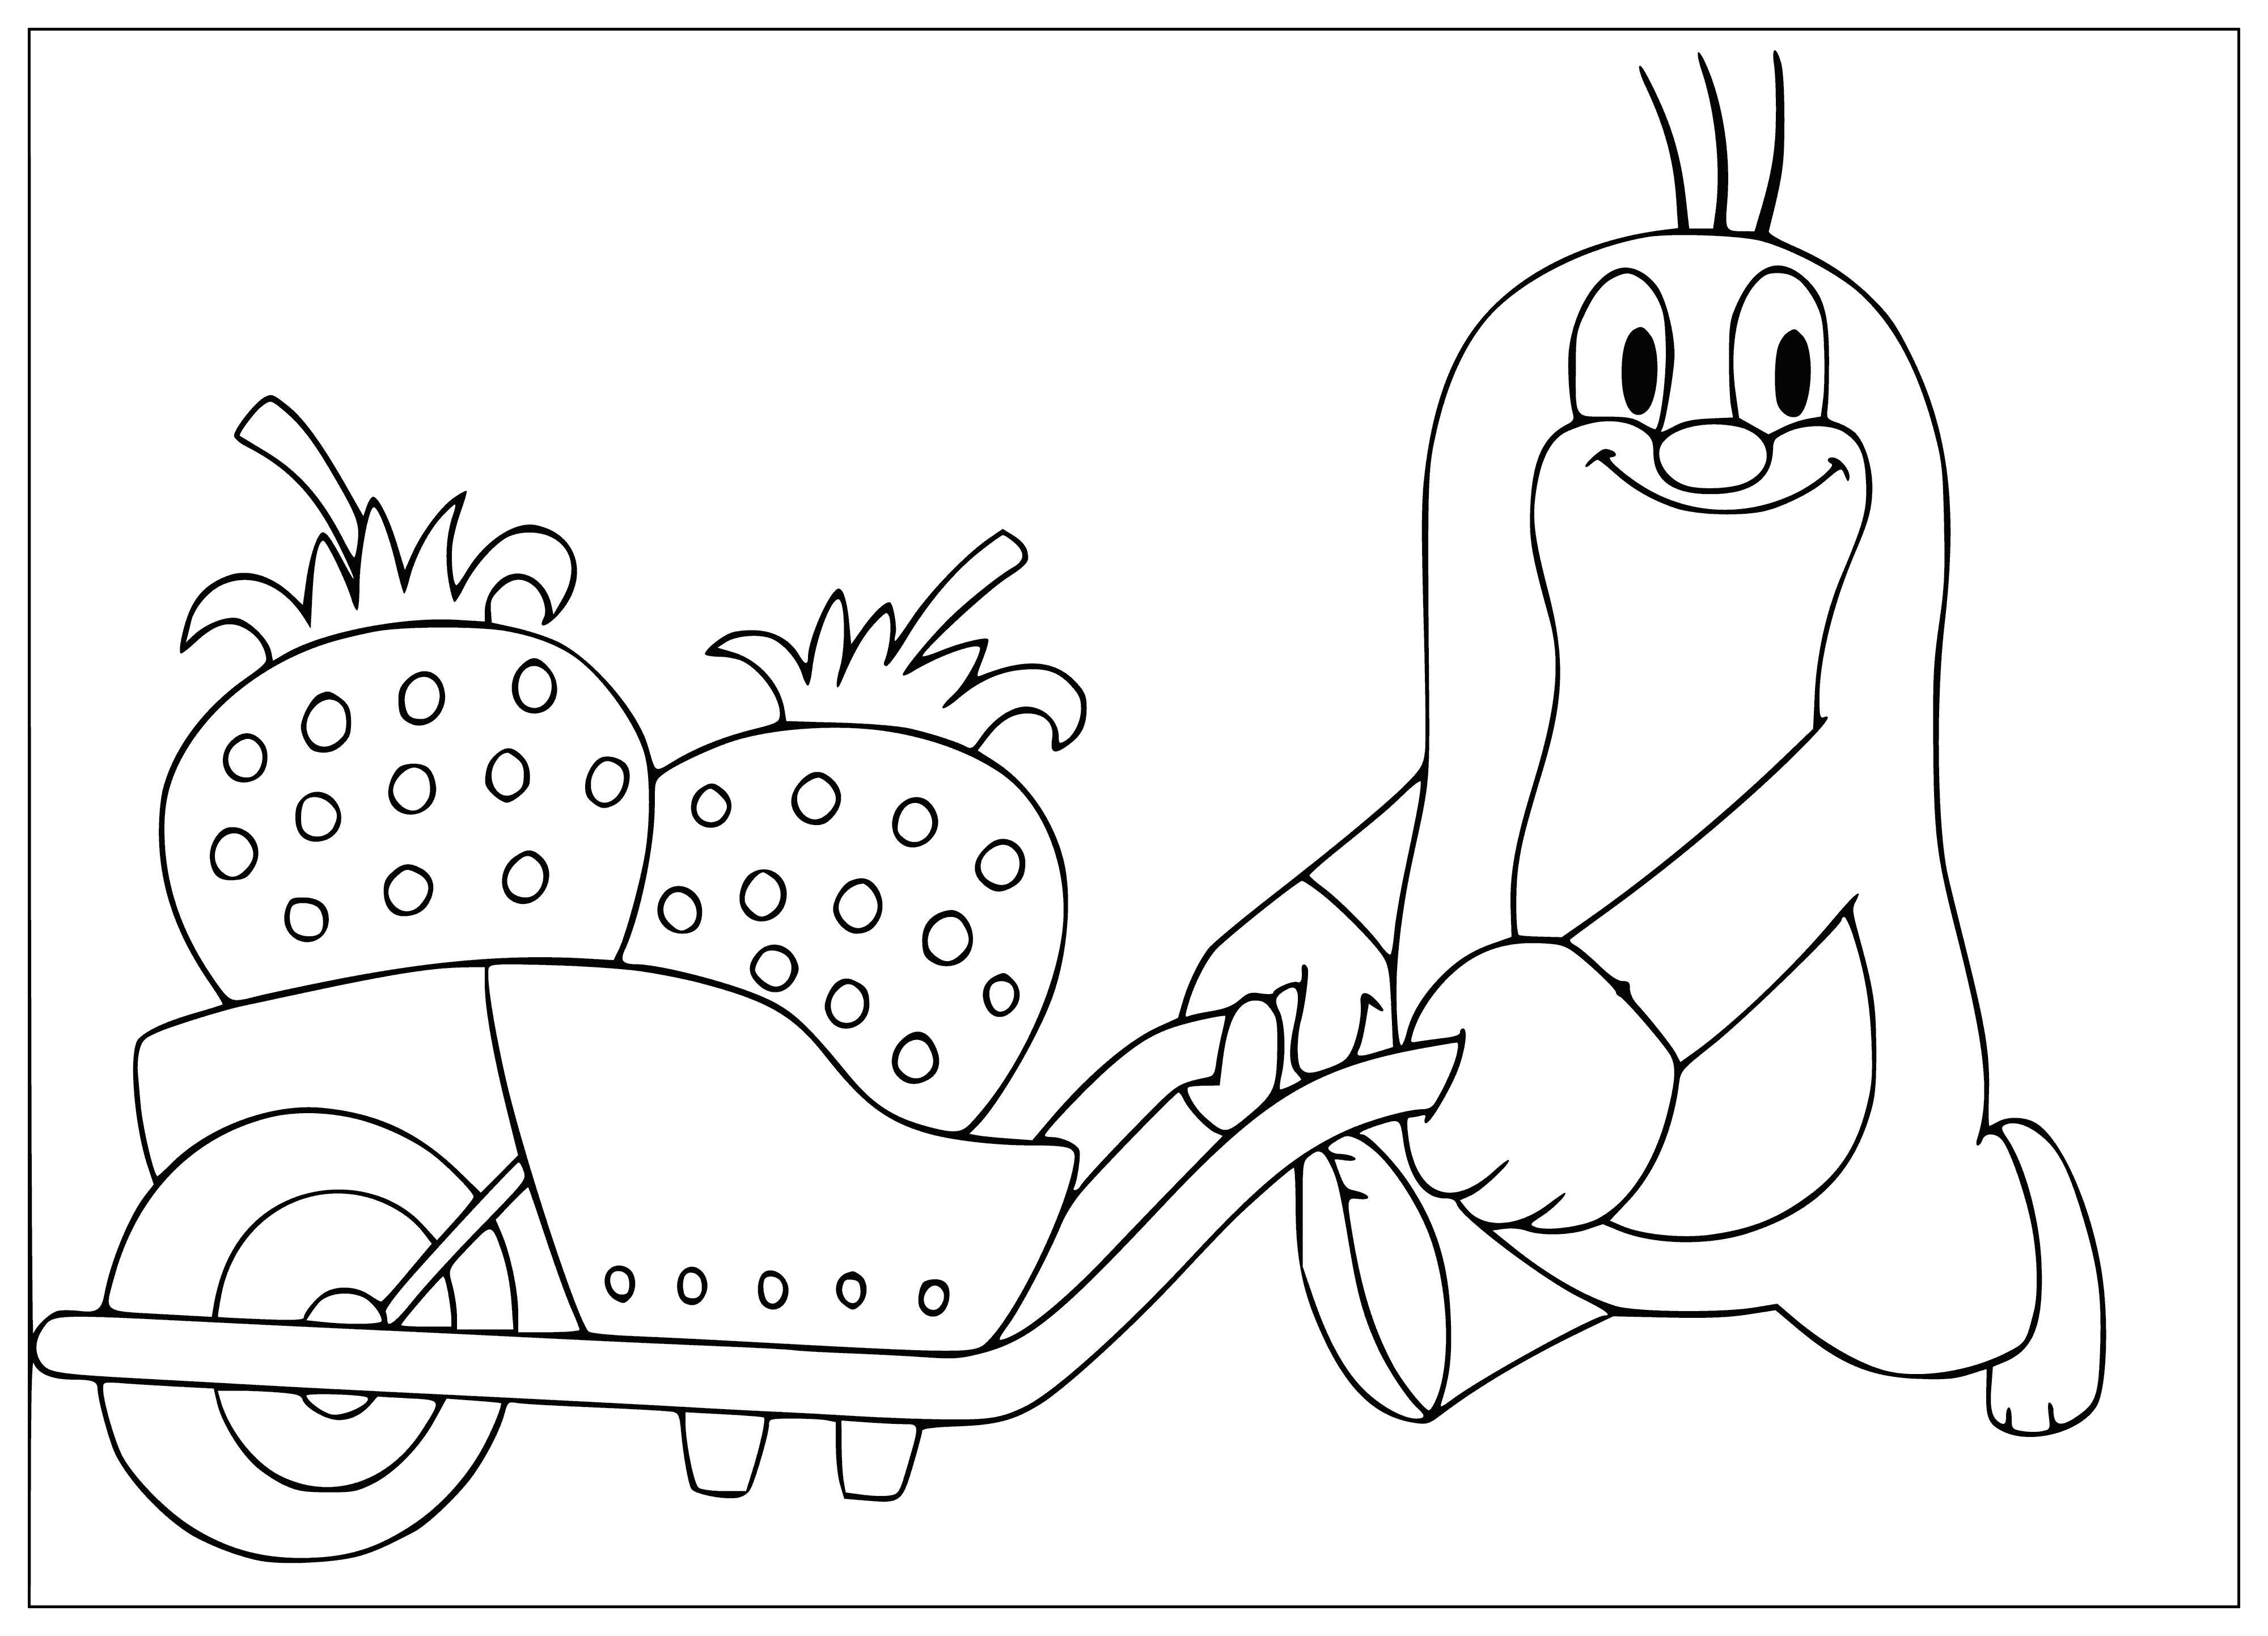 coloring page: Mole is pushing strawberry through ground w/nose; eyes & mouth closed. Strawberry red, green leaves.